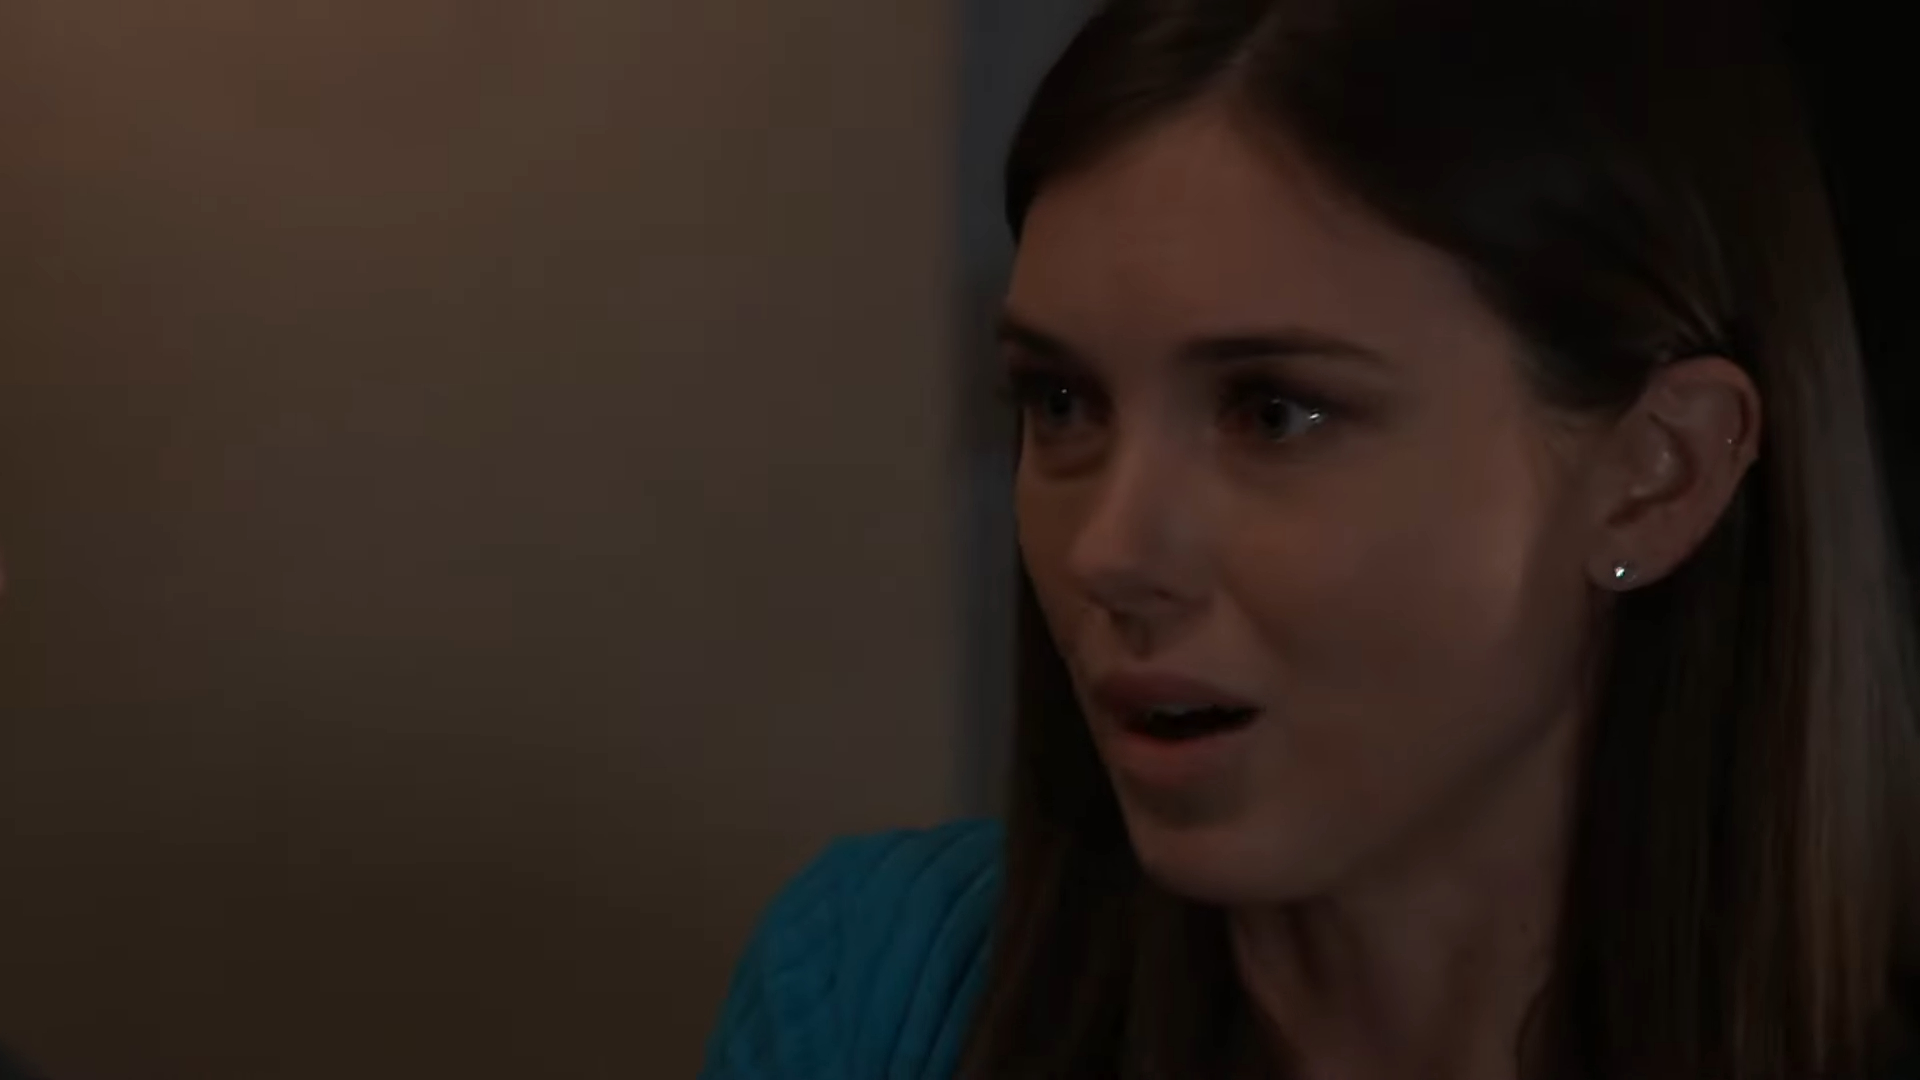 willow asks if michael is wrong GH